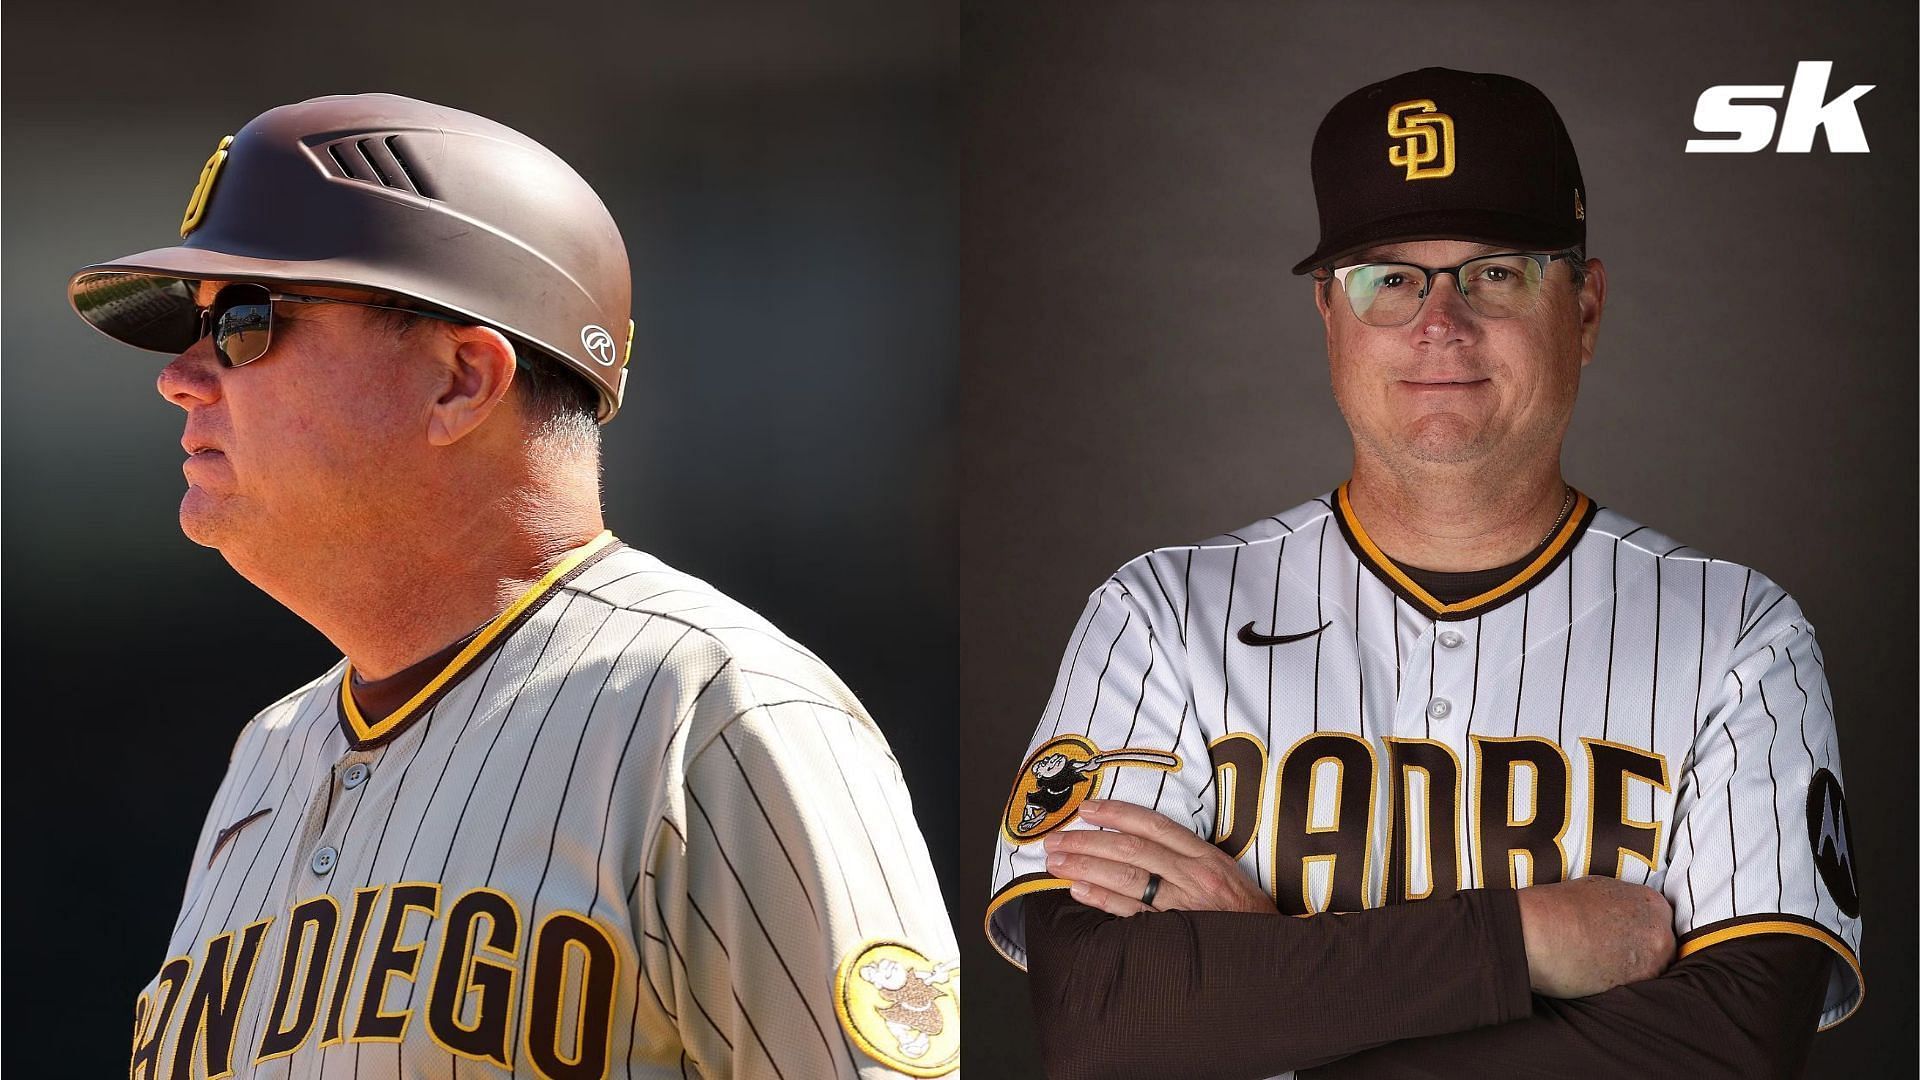 MLB Insider believes Mike Shildt could become the Padres manager if Bob Melvin departs the organization